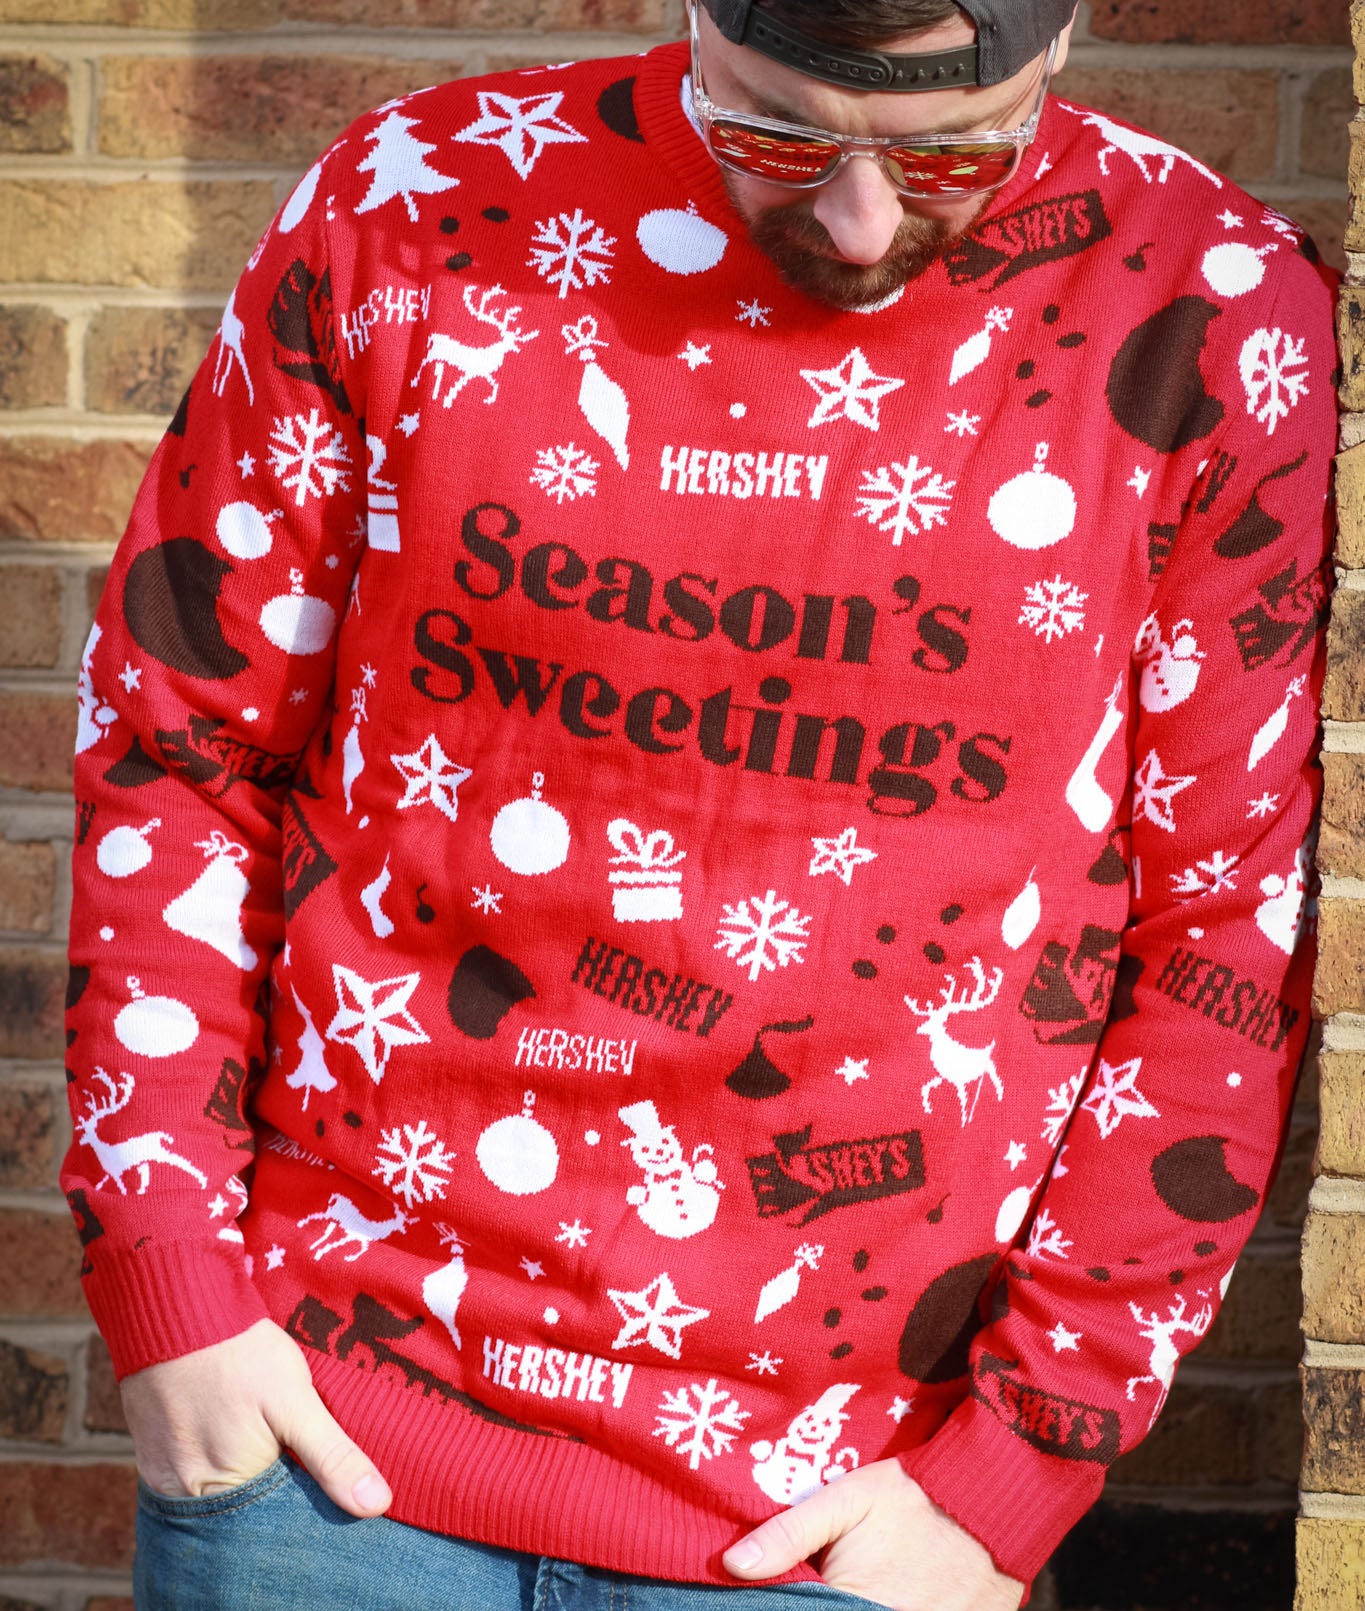 HERSHEY'S Season's Sweetings / Knit Sweater - Route One Apparel